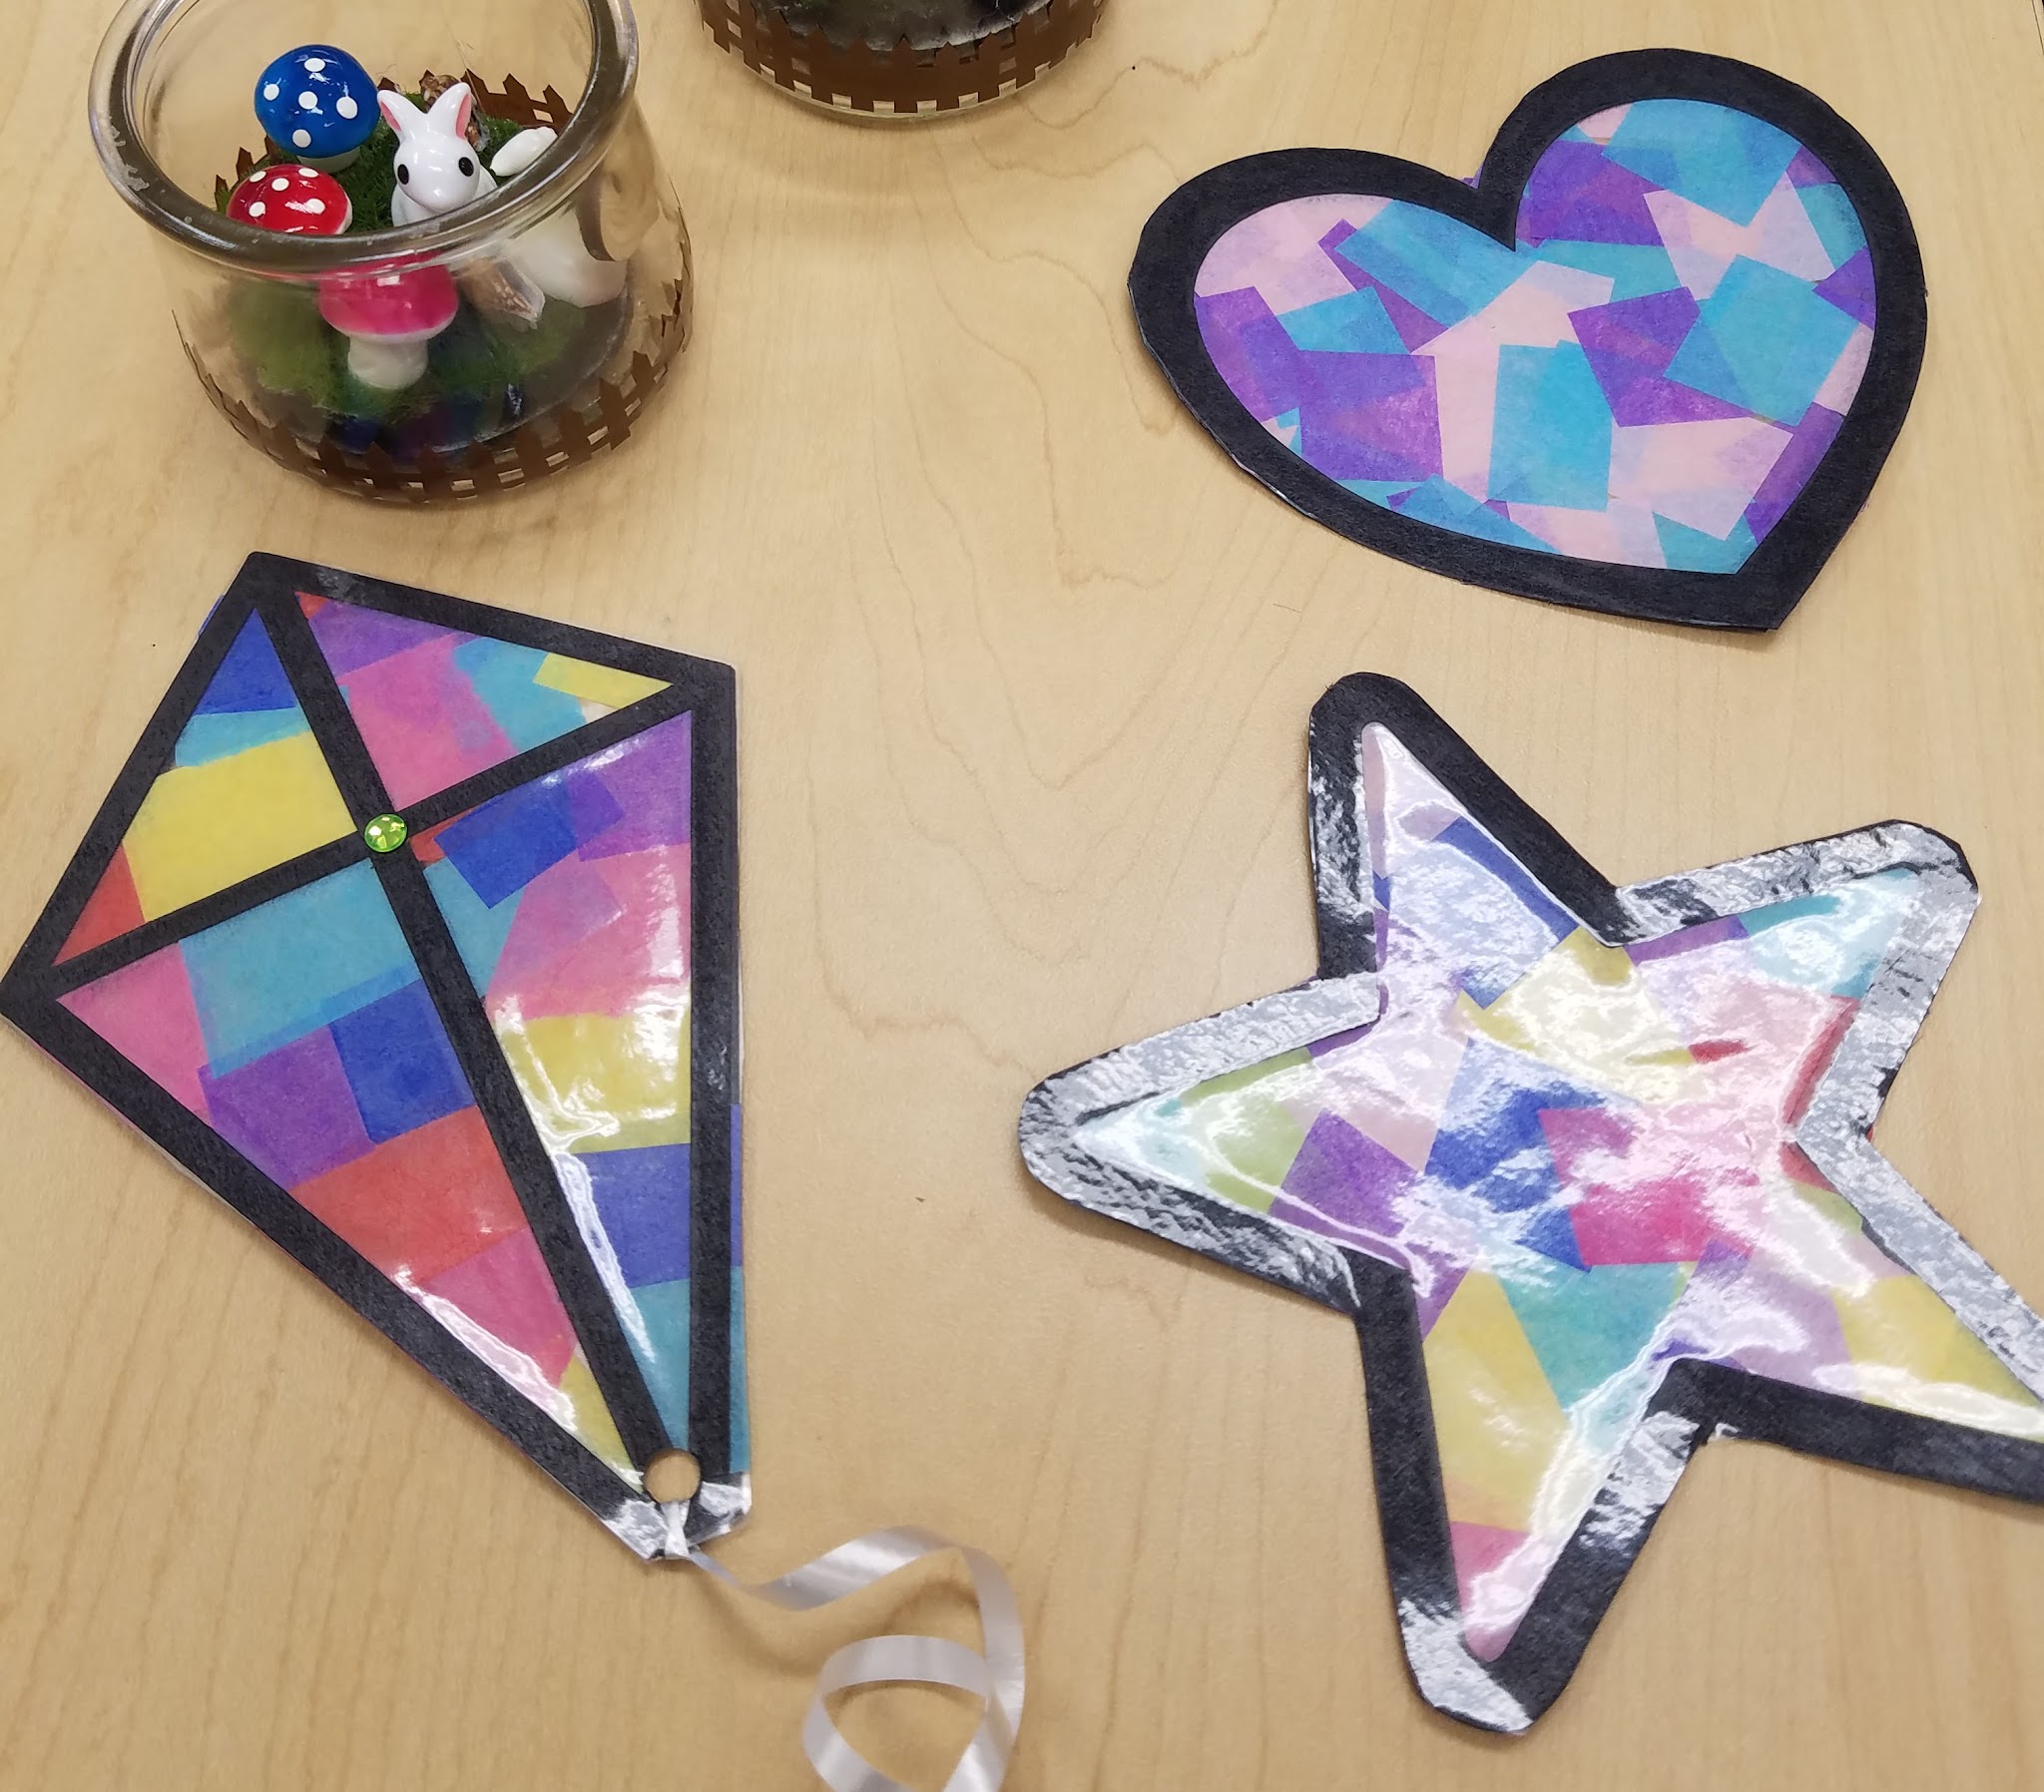 faux stained glass suncatcher in the shape of a kite, star, and heart